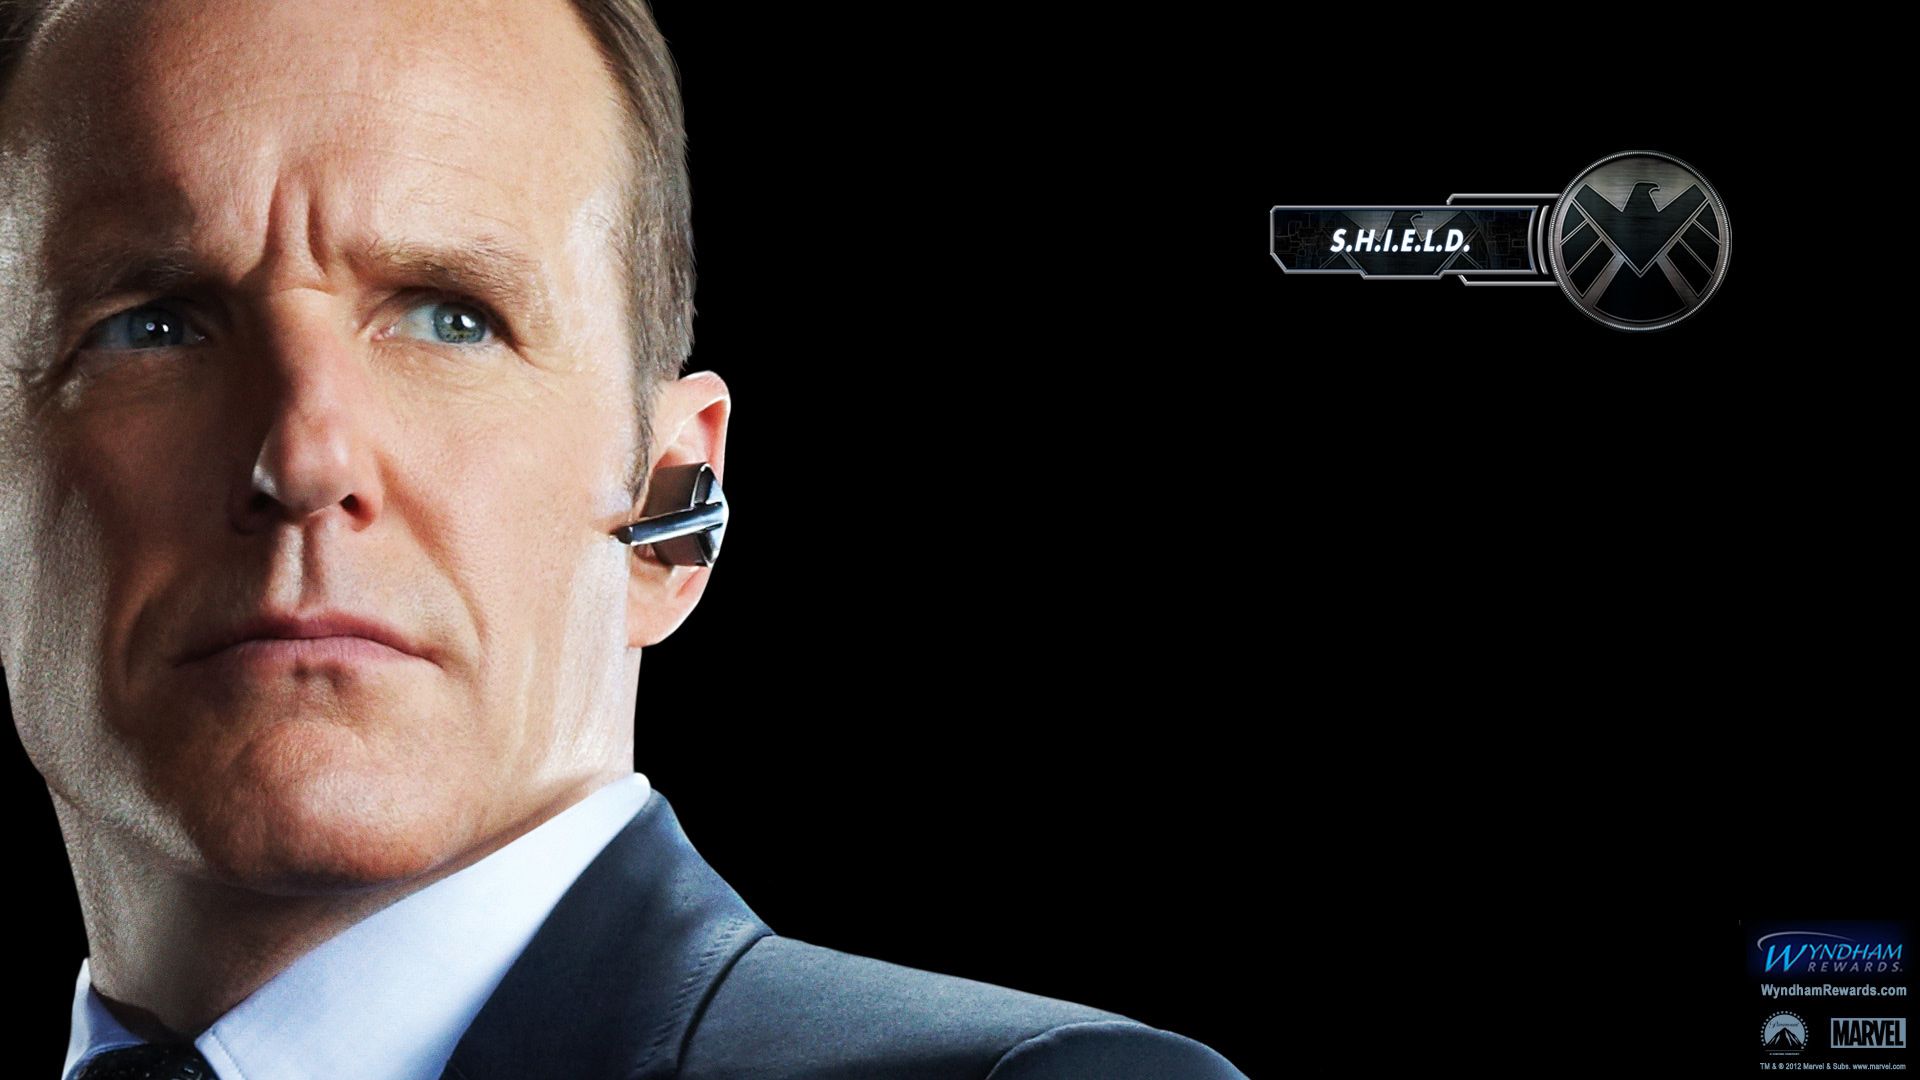 Avengers.H.I.E.L.D. Joss is at it again.Agent Coulson lives!. Phil coulson, Avengers universe, Avengers